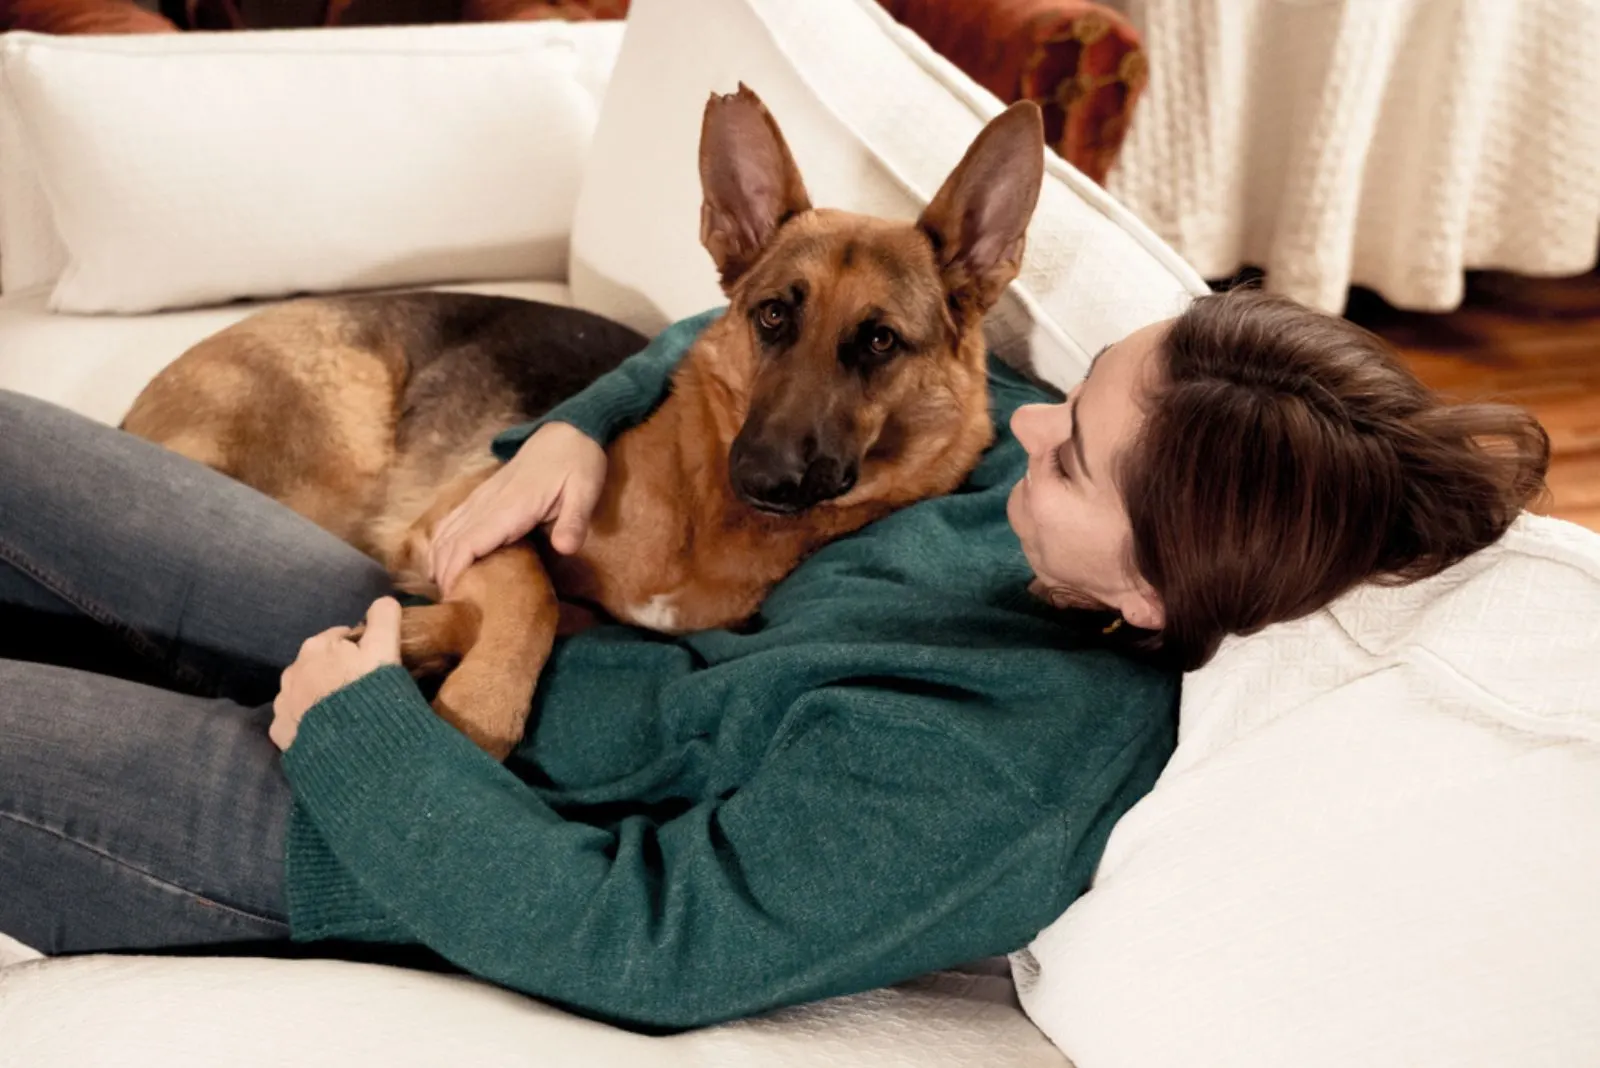 german shepherd dog sitting on his owner on the couch